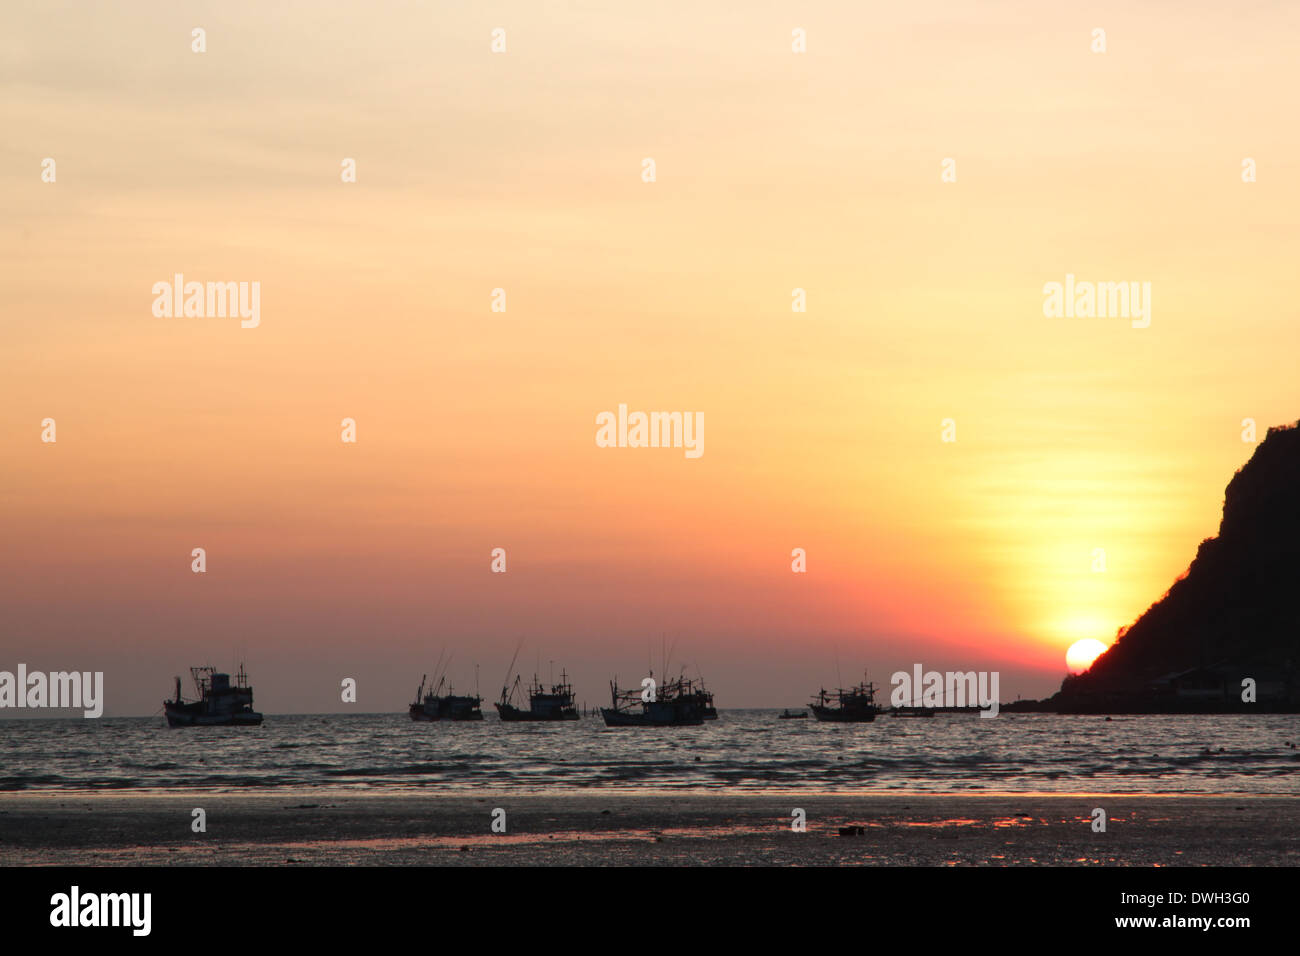 Evening beach and sunset,sea of Thailand. Stock Photo